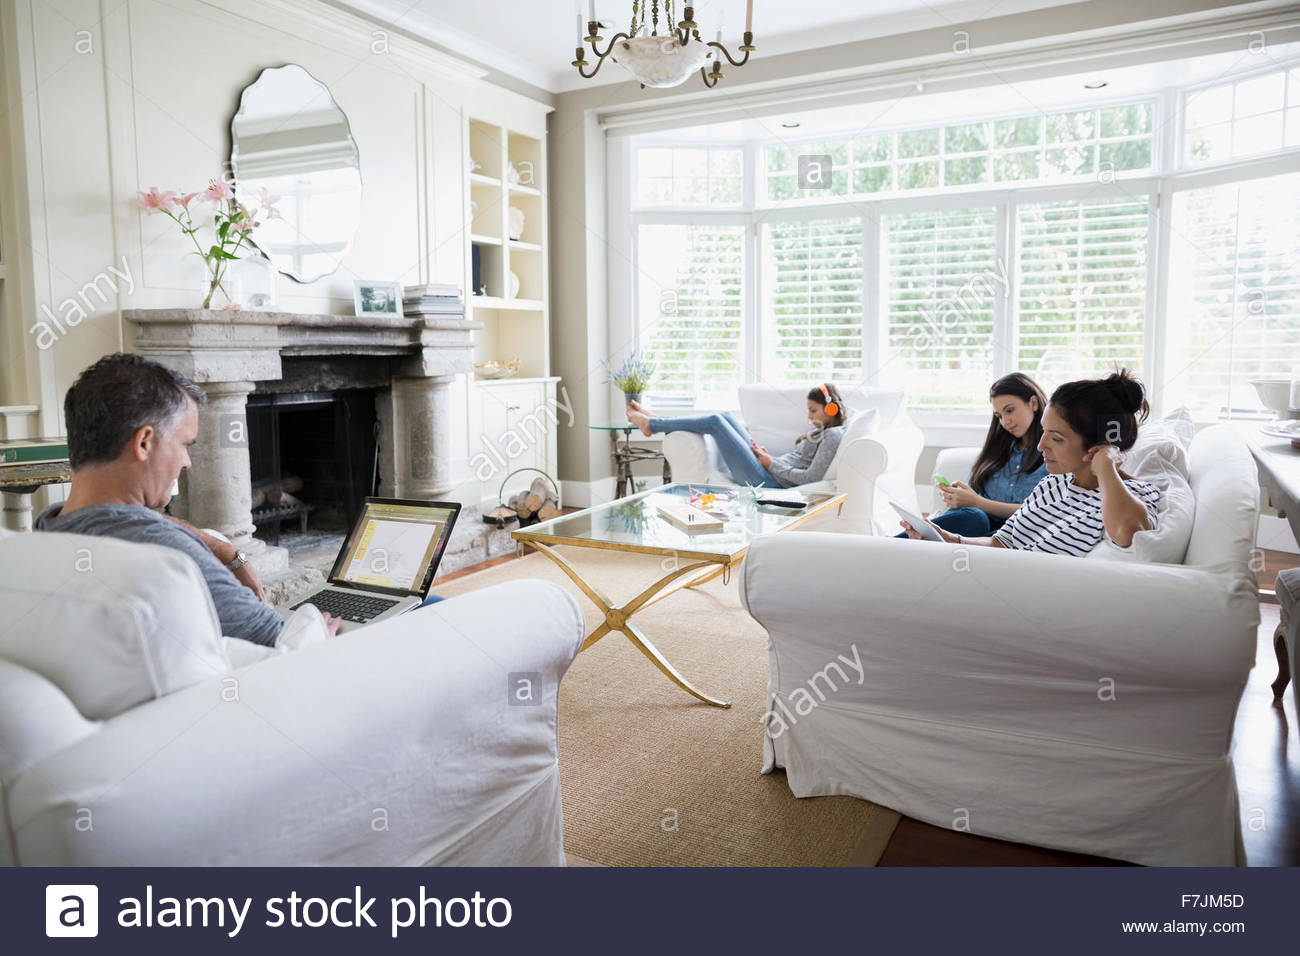 Family using wireless technology in living room Stock Photo